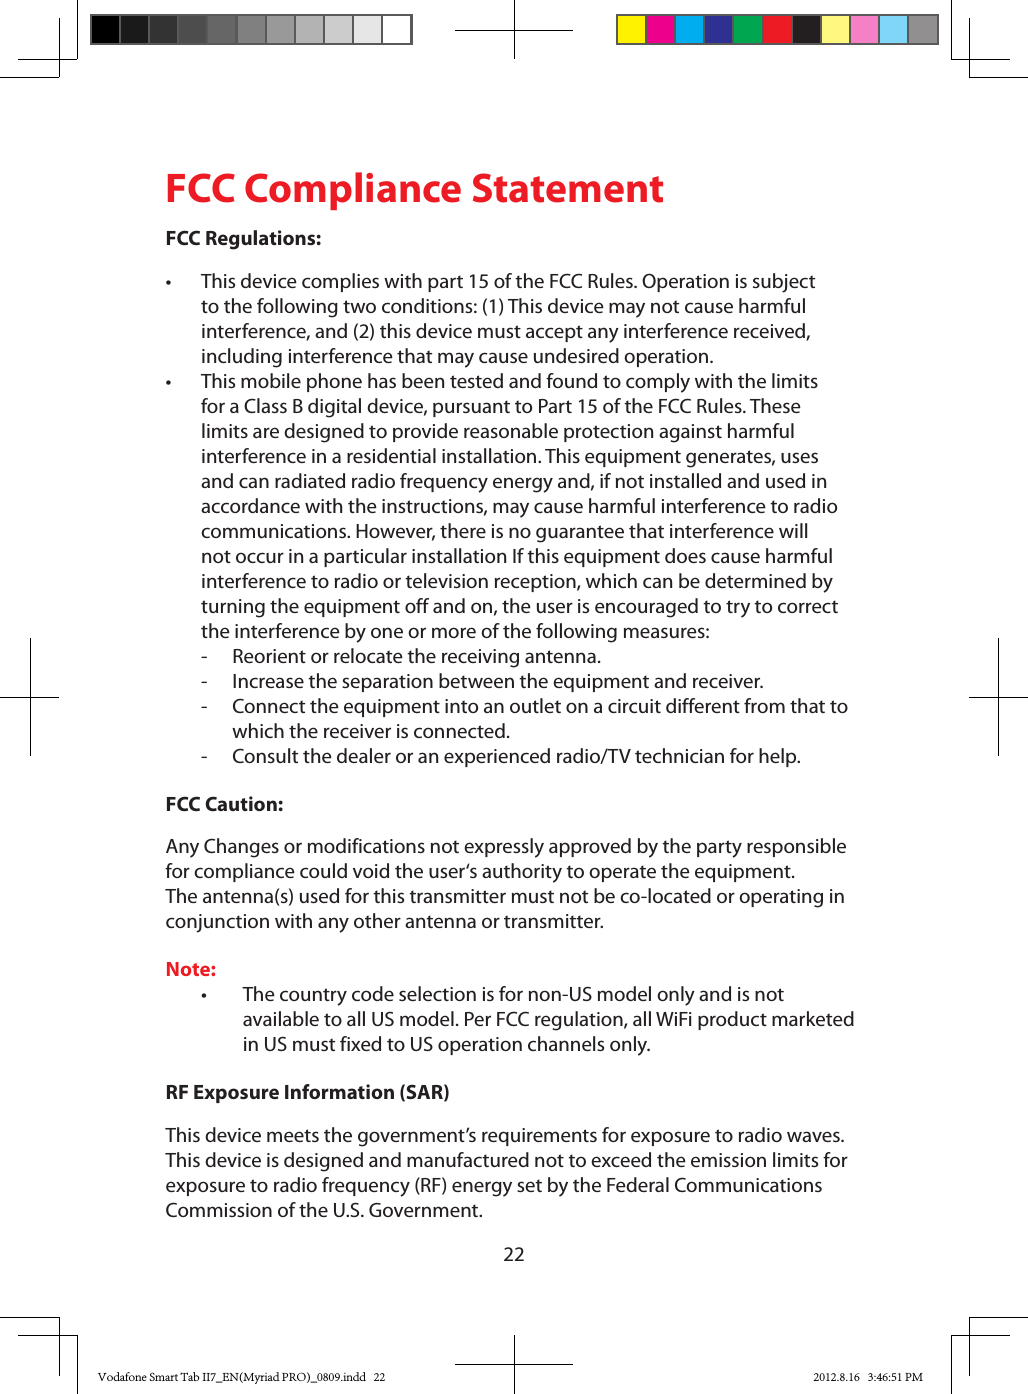 22FCC Compliance StatementFCC Regulations:• Thisdevicecomplieswithpart15oftheFCCRules.Operationissubjectto the following two conditions: (1) This device may not cause harmful interference,and(2)thisdevicemustacceptanyinterferencereceived,including interference that may cause undesired operation.• ThismobilephonehasbeentestedandfoundtocomplywiththelimitsforaClassBdigitaldevice,pursuanttoPart15oftheFCCRules.Theselimits are designed to provide reasonable protection against harmful interferenceinaresidentialinstallation.Thisequipmentgenerates,usesandcanradiatedradiofrequencyenergyand,ifnotinstalledandusedinaccordance with the instructions, may cause harmful interference to radio communications.However,thereisnoguaranteethatinterferencewillnotoccurinaparticularinstallationIfthisequipmentdoescauseharmfulinterference to radio or television reception, which can be determined by turningtheequipmentoffandon,theuserisencouragedtotrytocorrectthe interference by one or more of the following measures: - Reorientorrelocatethereceivingantenna. - Increasetheseparationbetweentheequipmentandreceiver. - Connecttheequipmentintoanoutletonacircuitdifferentfromthattowhich the receiver is connected. - Consultthedealeroranexperiencedradio/TVtechnicianforhelp.FCC Caution:AnyChangesormodificationsnotexpresslyapprovedbythepartyresponsibleforcompliancecouldvoidtheuser‘sauthoritytooperatetheequipment.The antenna(s) used for this transmitter must not be co-located or operating in conjunctionwithanyotherantennaortransmitter.Note:• Thecountrycodeselectionisfornon-USmodelonlyandisnotavailabletoallUSmodel.PerFCCregulation,allWiFiproductmarketedinUSmustfixedtoUSoperationchannelsonly.RF Exposure Information (SAR)Thisdevicemeetsthegovernment’srequirementsforexposuretoradiowaves.This device is designed and manufactured not to exceed the emission limits for exposuretoradiofrequency(RF)energysetbytheFederalCommunicationsCommissionoftheU.S.Government.Vodafone Smart Tab II7_EN(Myriad PRO)_0809.indd   22 2012.8.16   3:46:51 PM